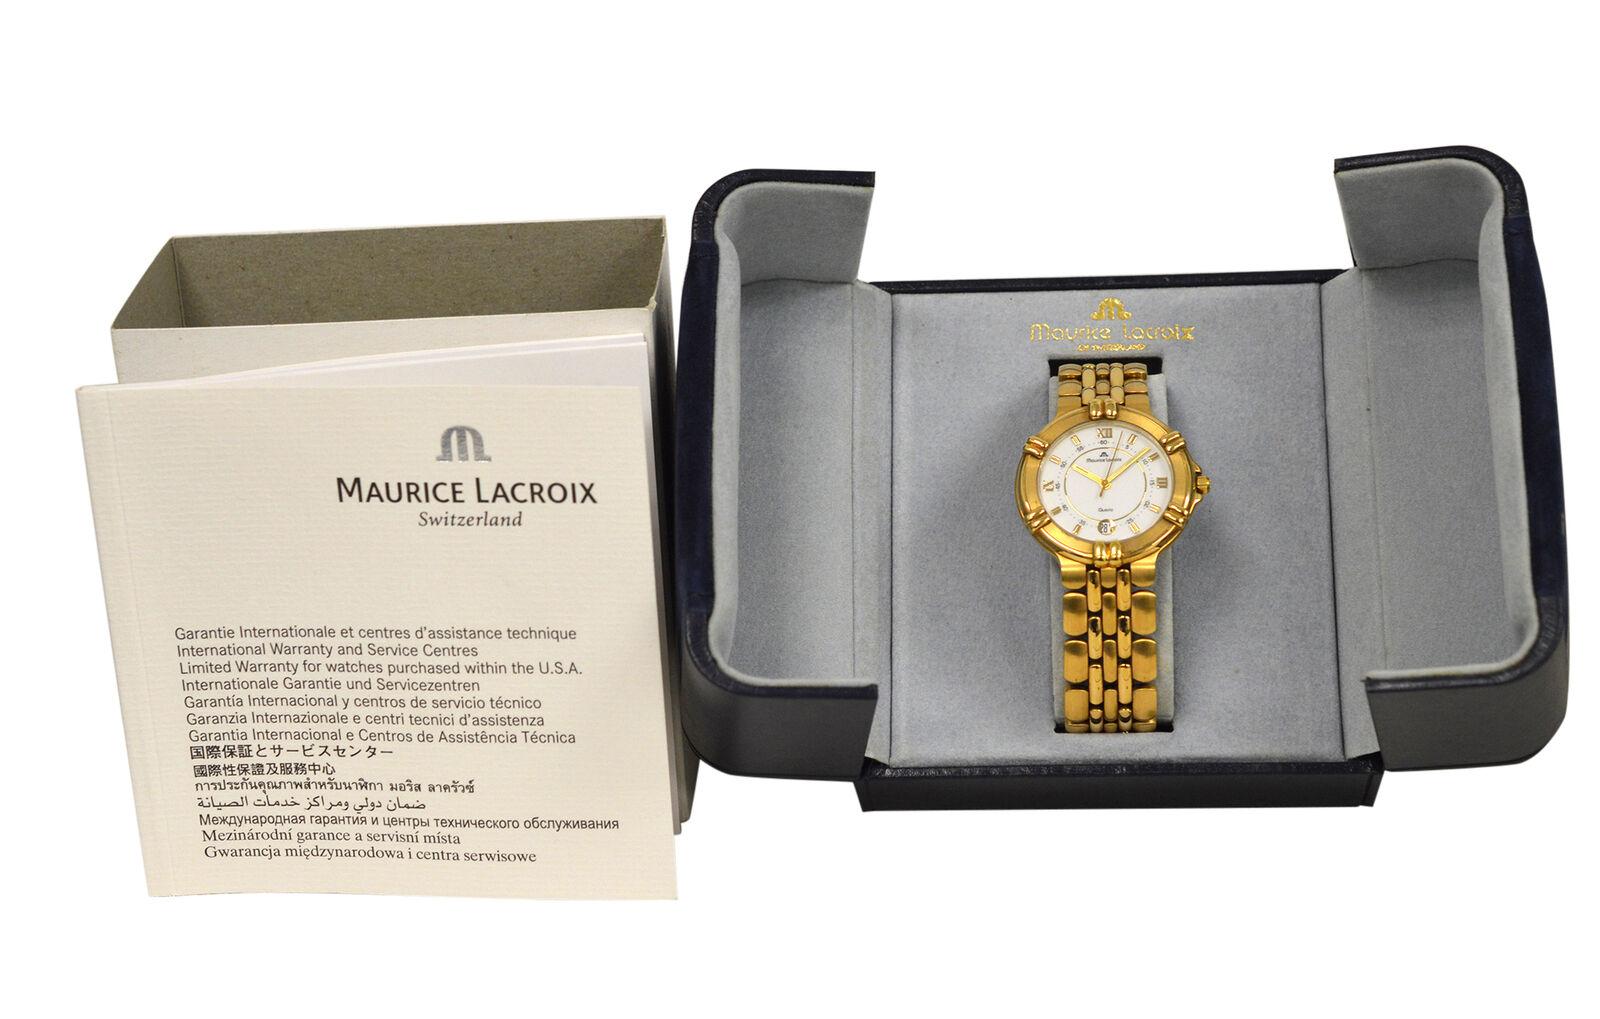 Brand	Maurice Lacroix
Model	Calypso 95375
Gender	Ladies'
Condition	New Old Stock Store display
Movement	Swiss Quartz
Case Material	Gold Electroplated Stainless Steel
Bracelet / Strap Material	
Gold Electroplated Stainless Steel

Clasp / Buckle